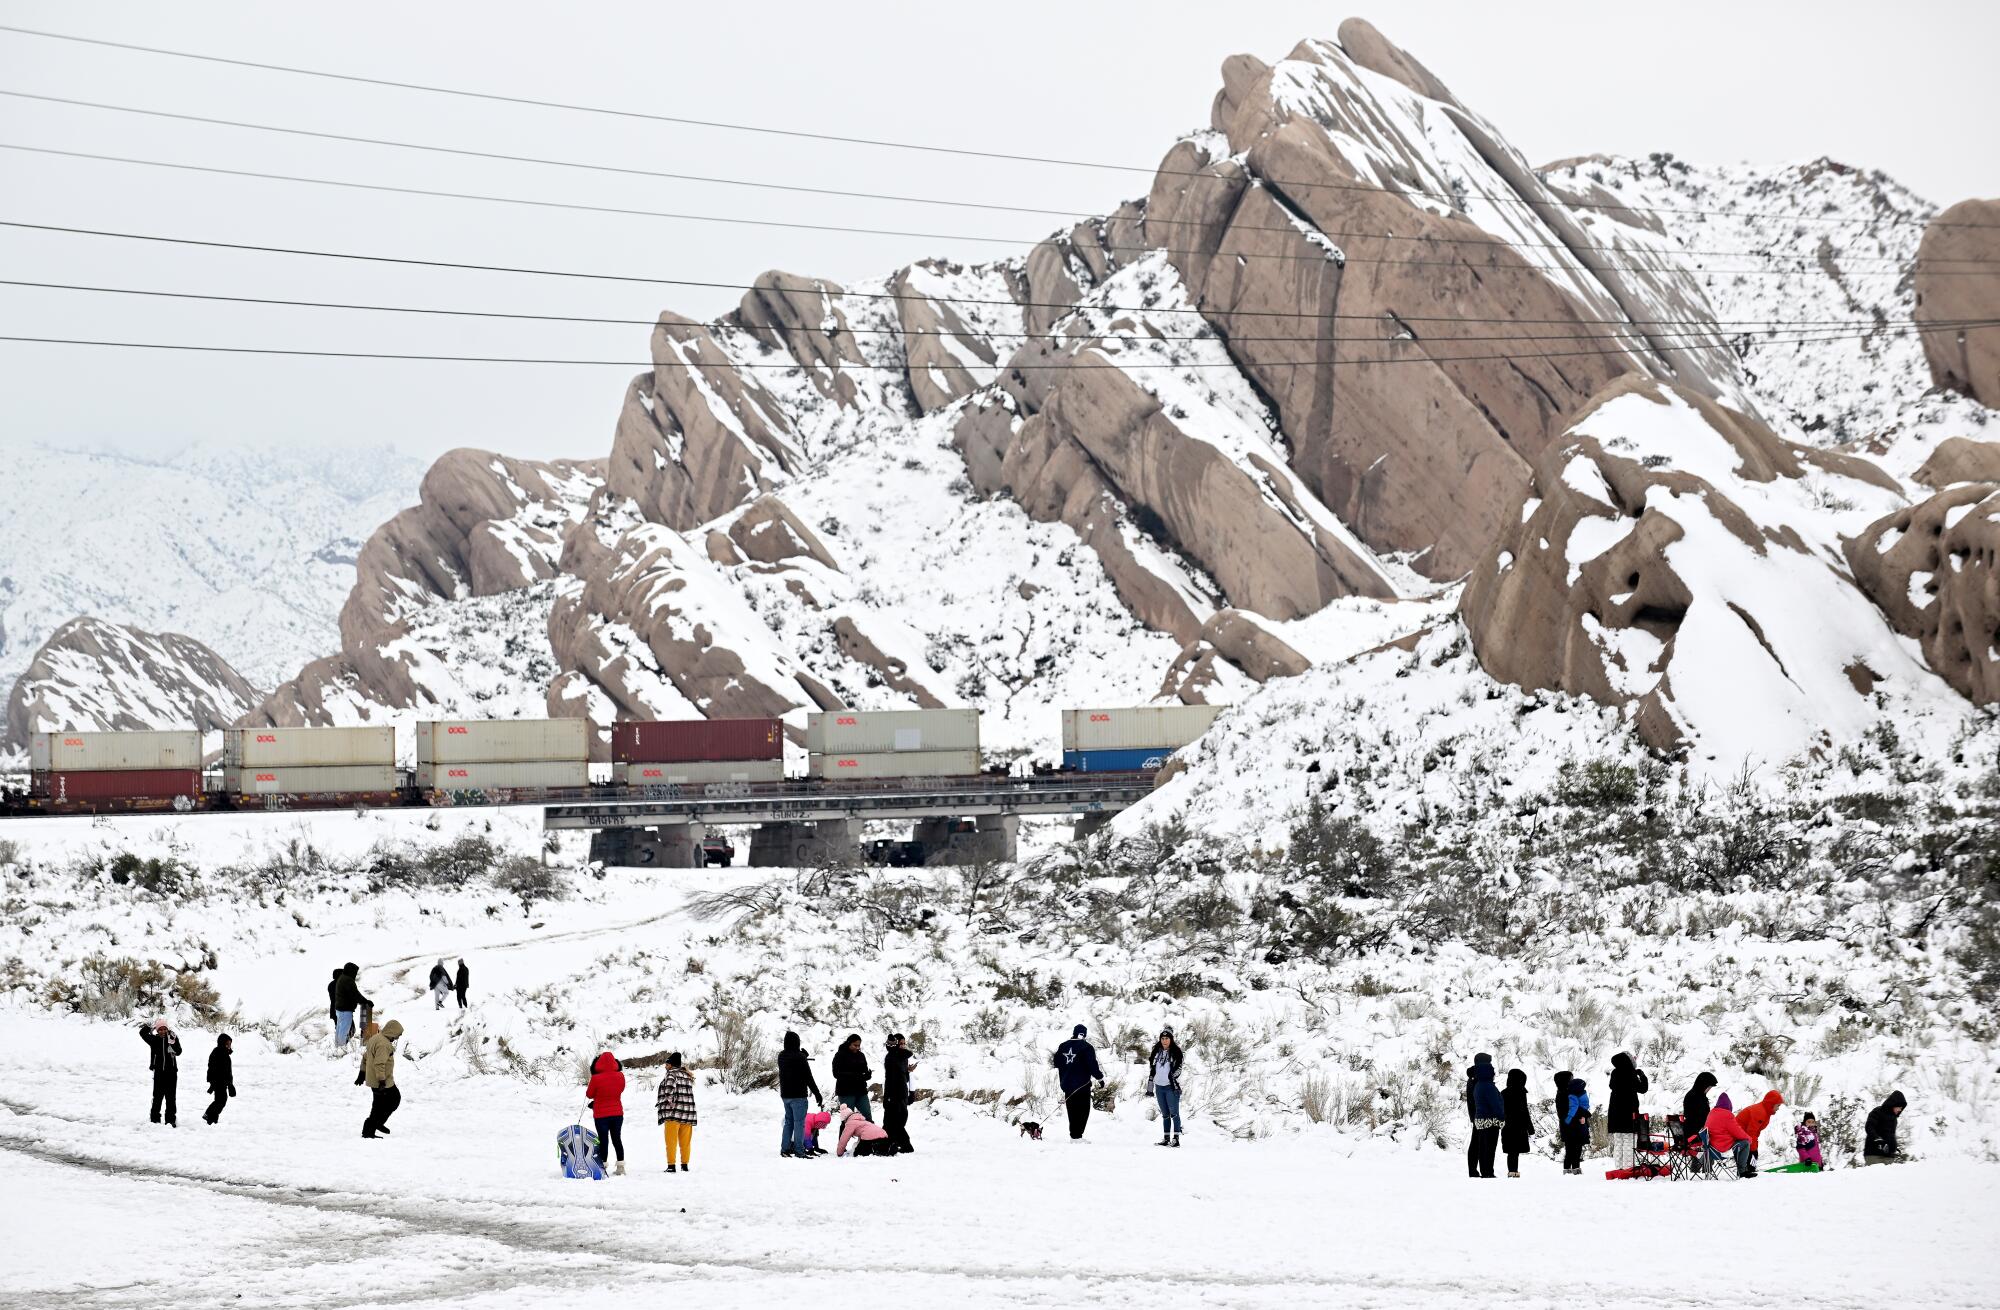 A distant shot of people gathered on a snowy landscape with a mountain as backdrop